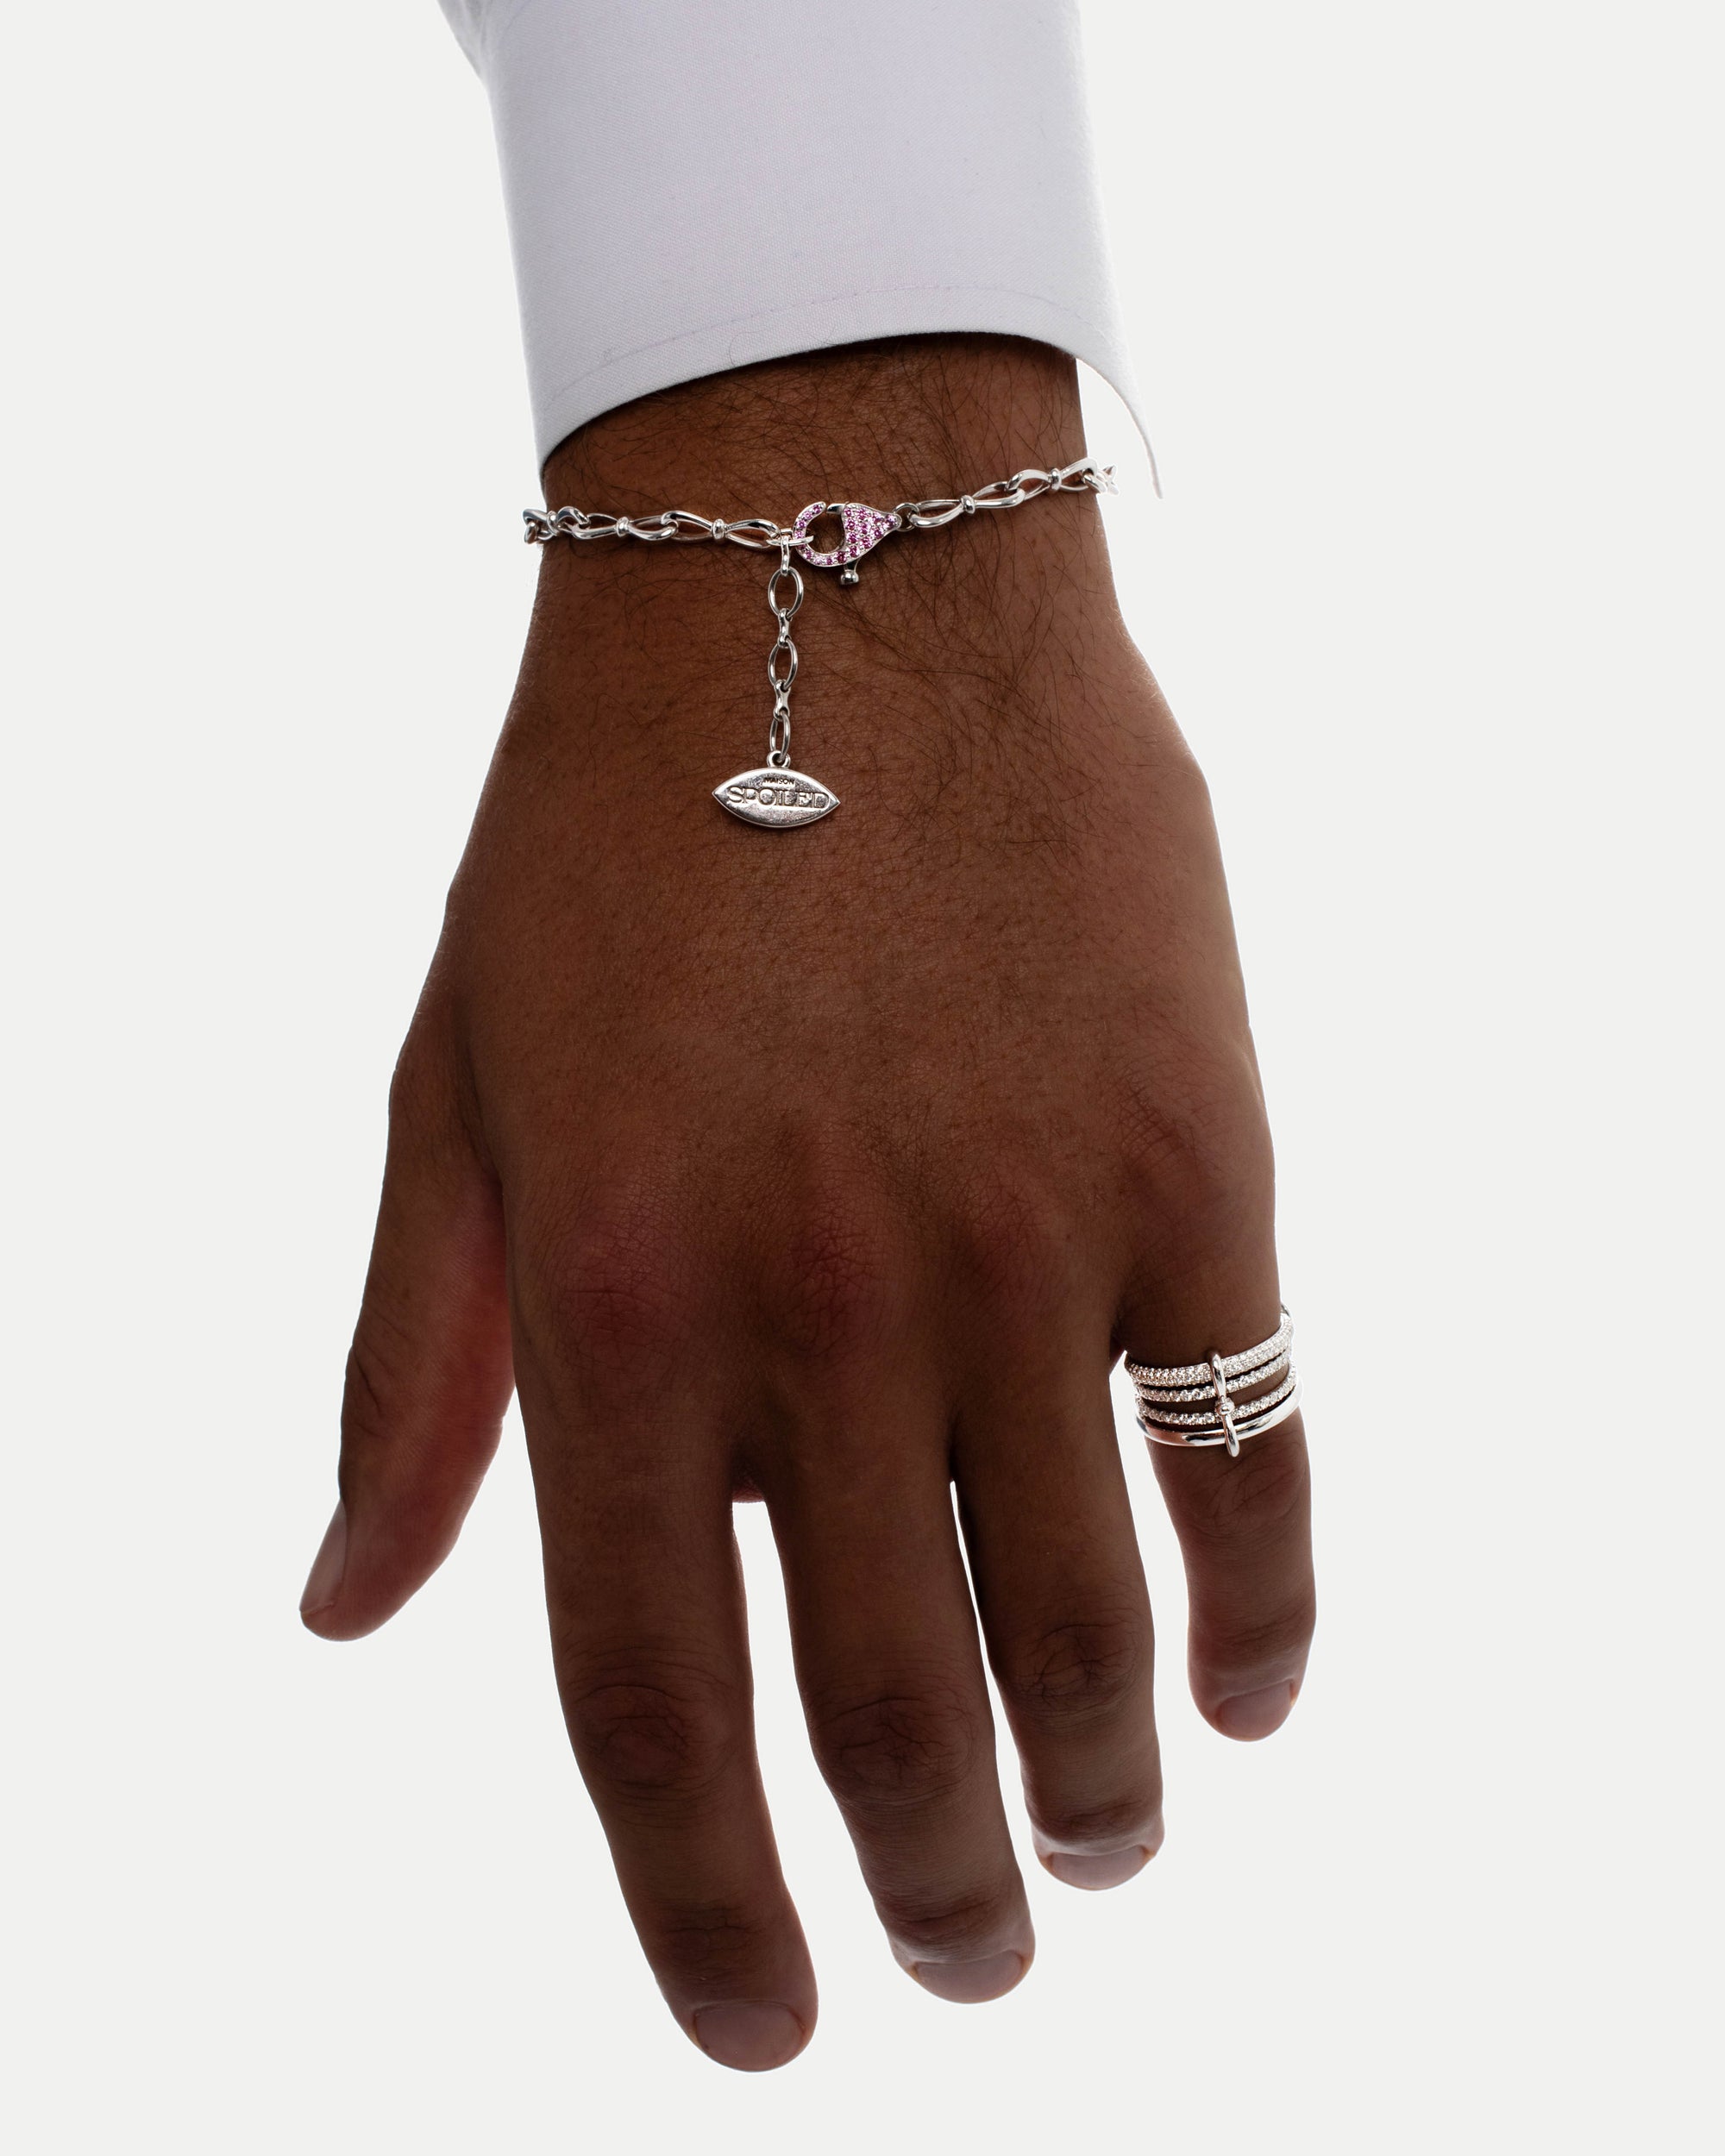 Together Forever Standard Infinity Link Bracelet with Pink Sapphire Spoiled Clasp